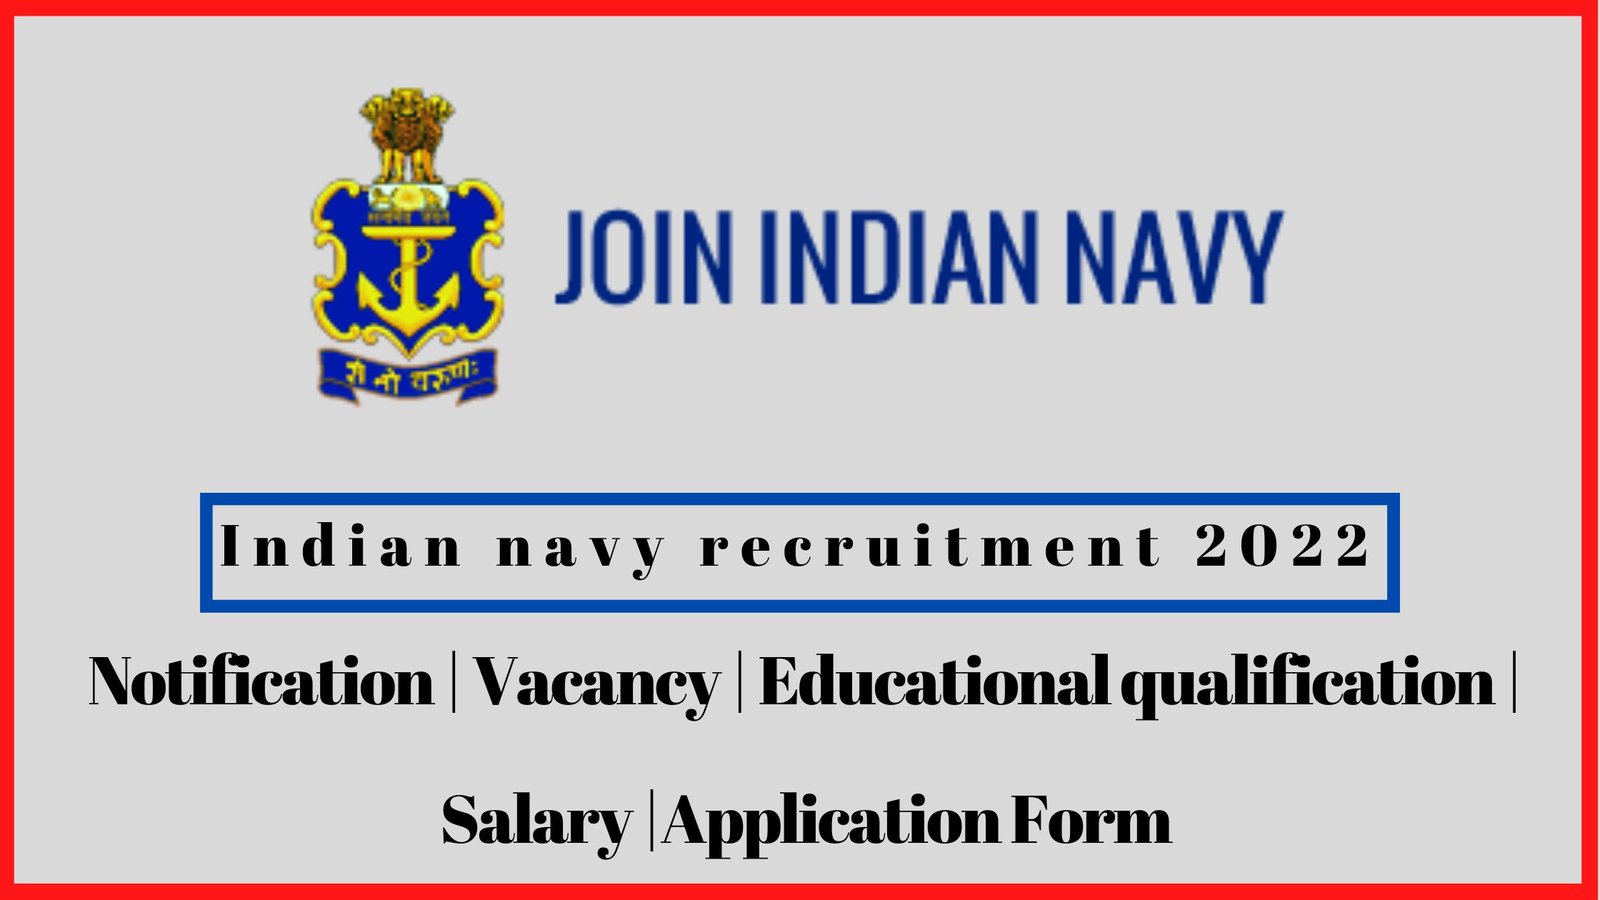 Indian navy recruitment 2022 in Tamil